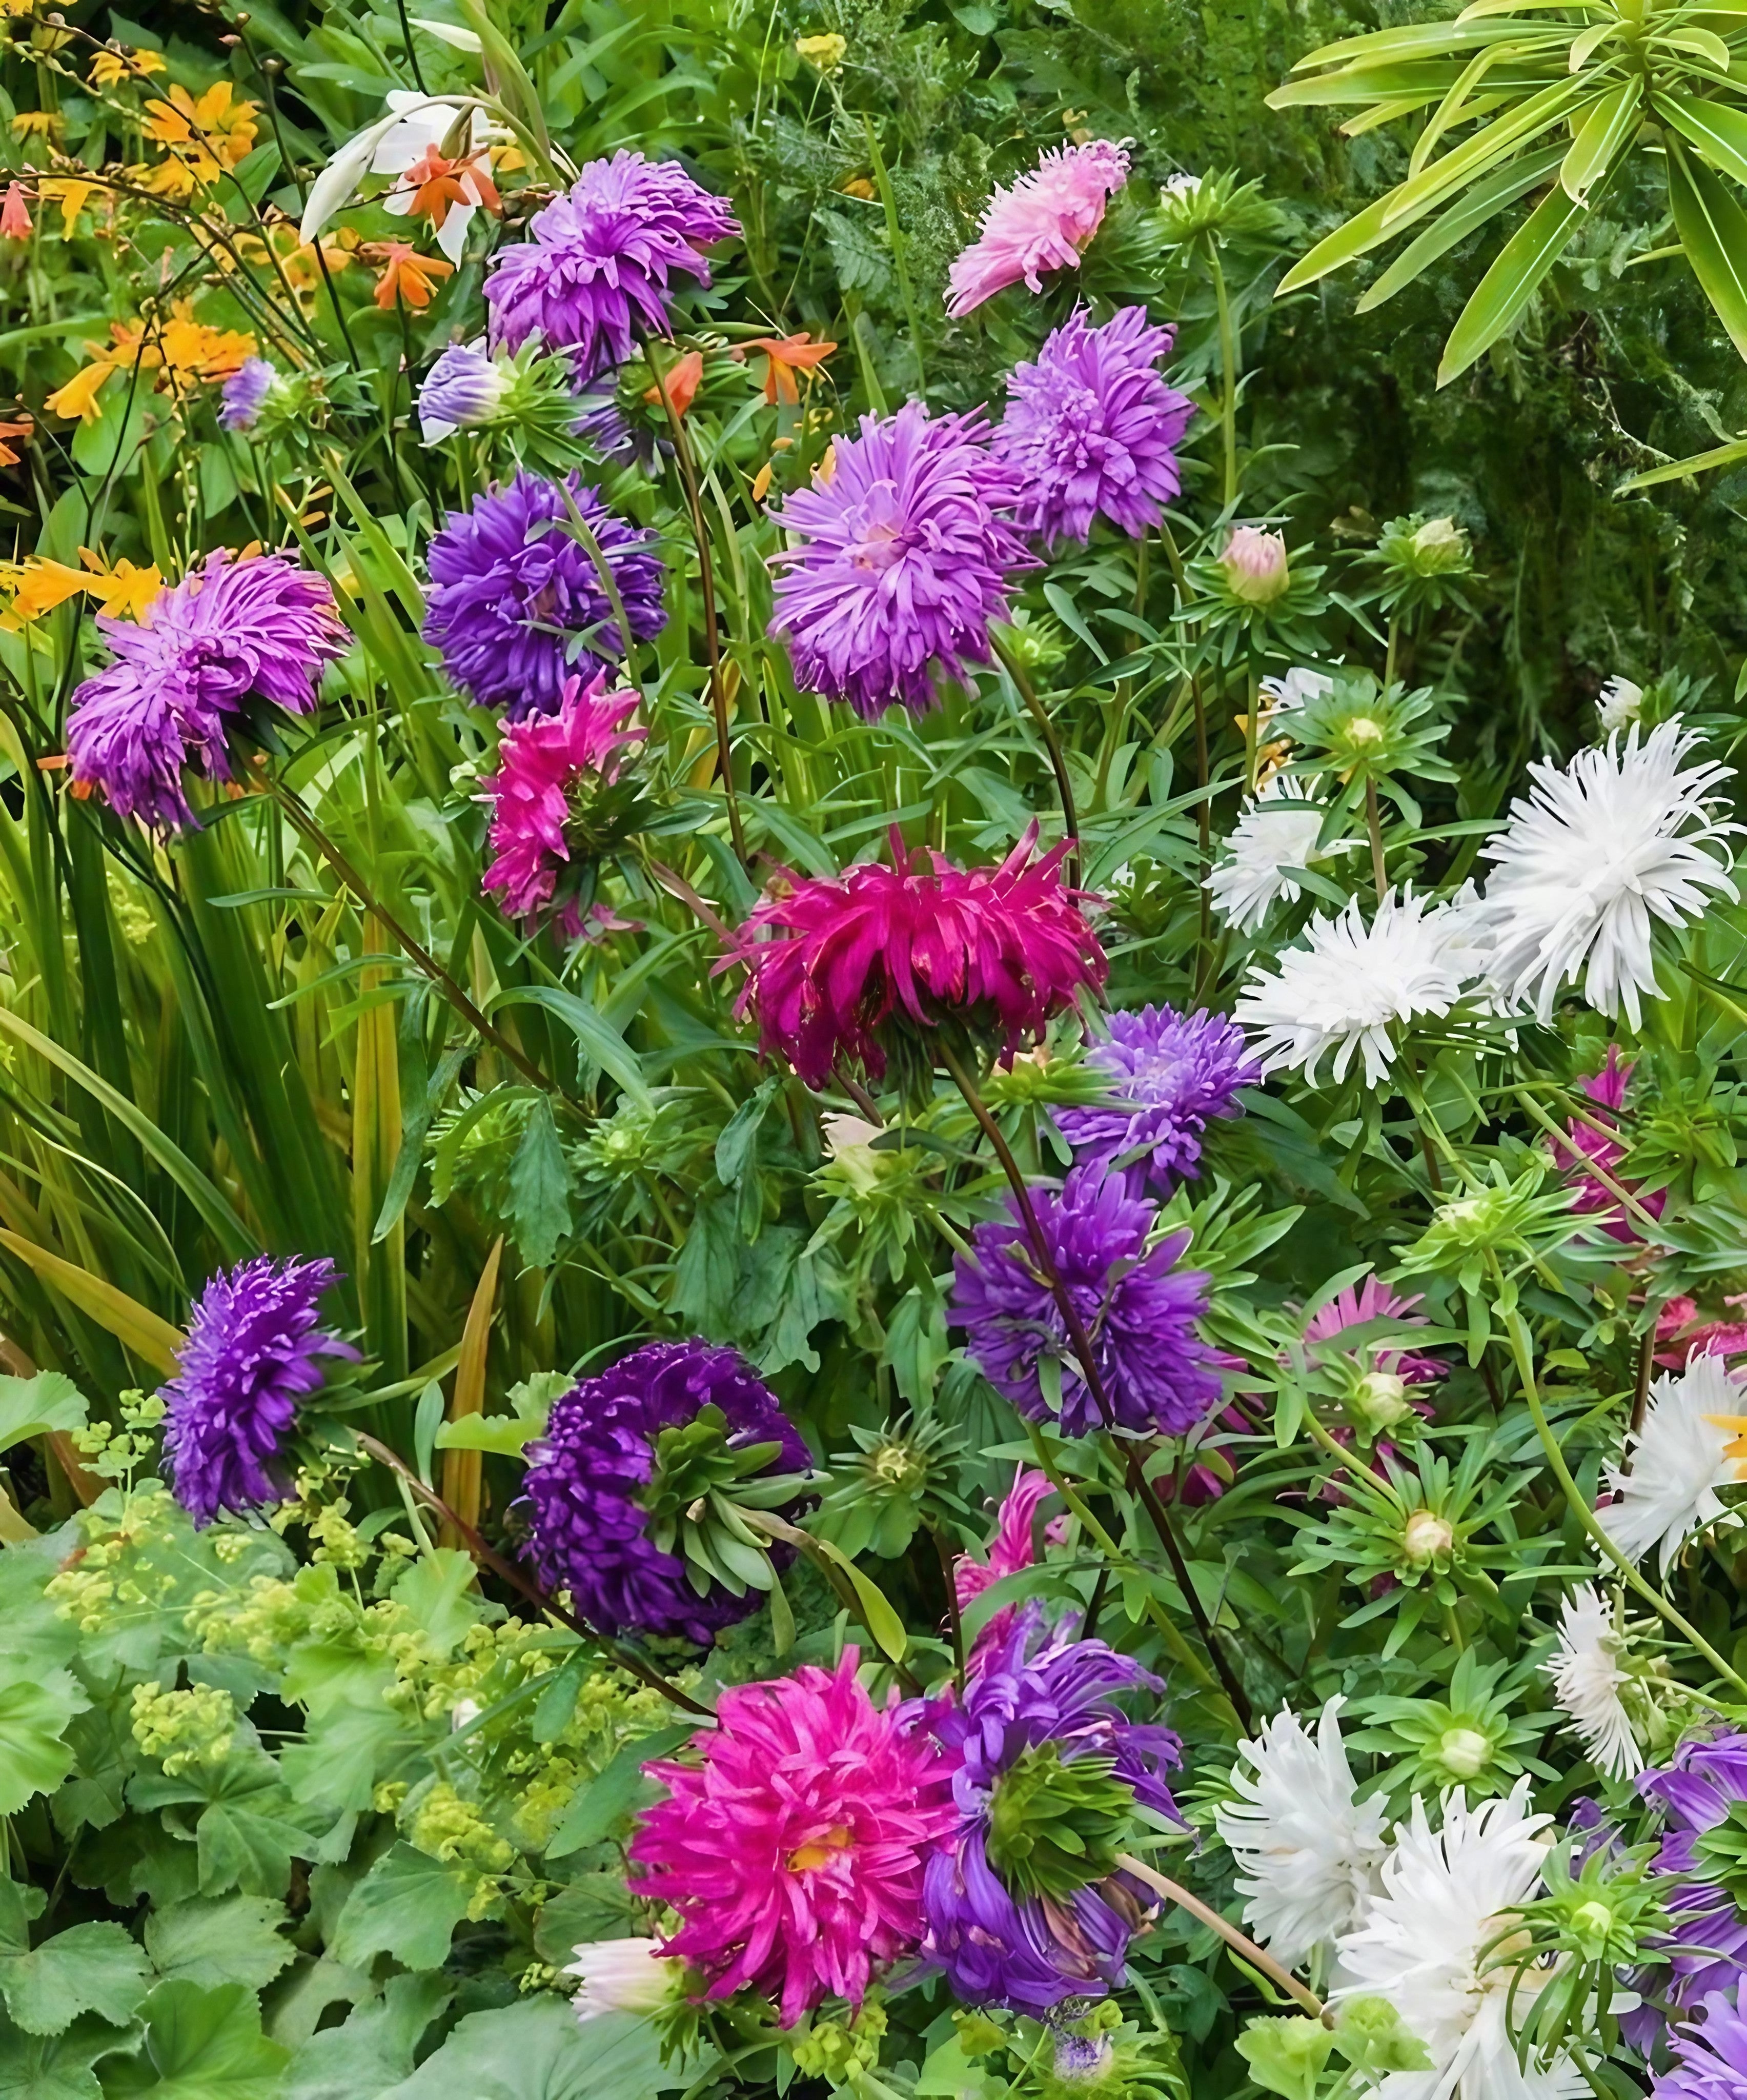 A diverse array of Aster Ostrich Plume flowers adding colour to a garden setting